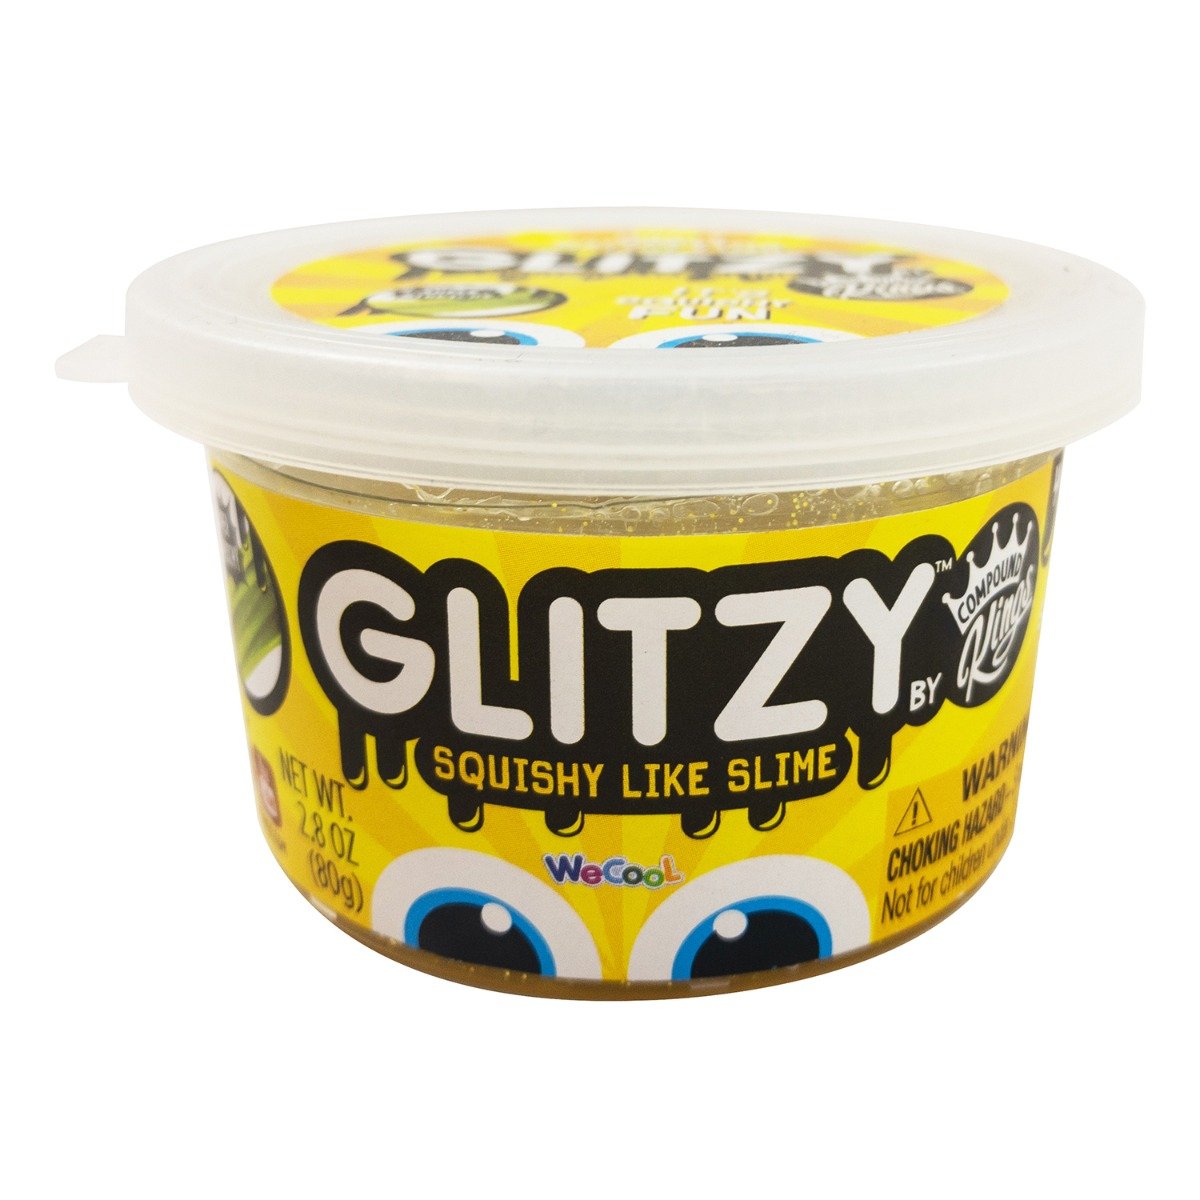 Gelatina Compound Kings – Glitzy Slime, Gold, 80 g Compound Kings imagine 2022